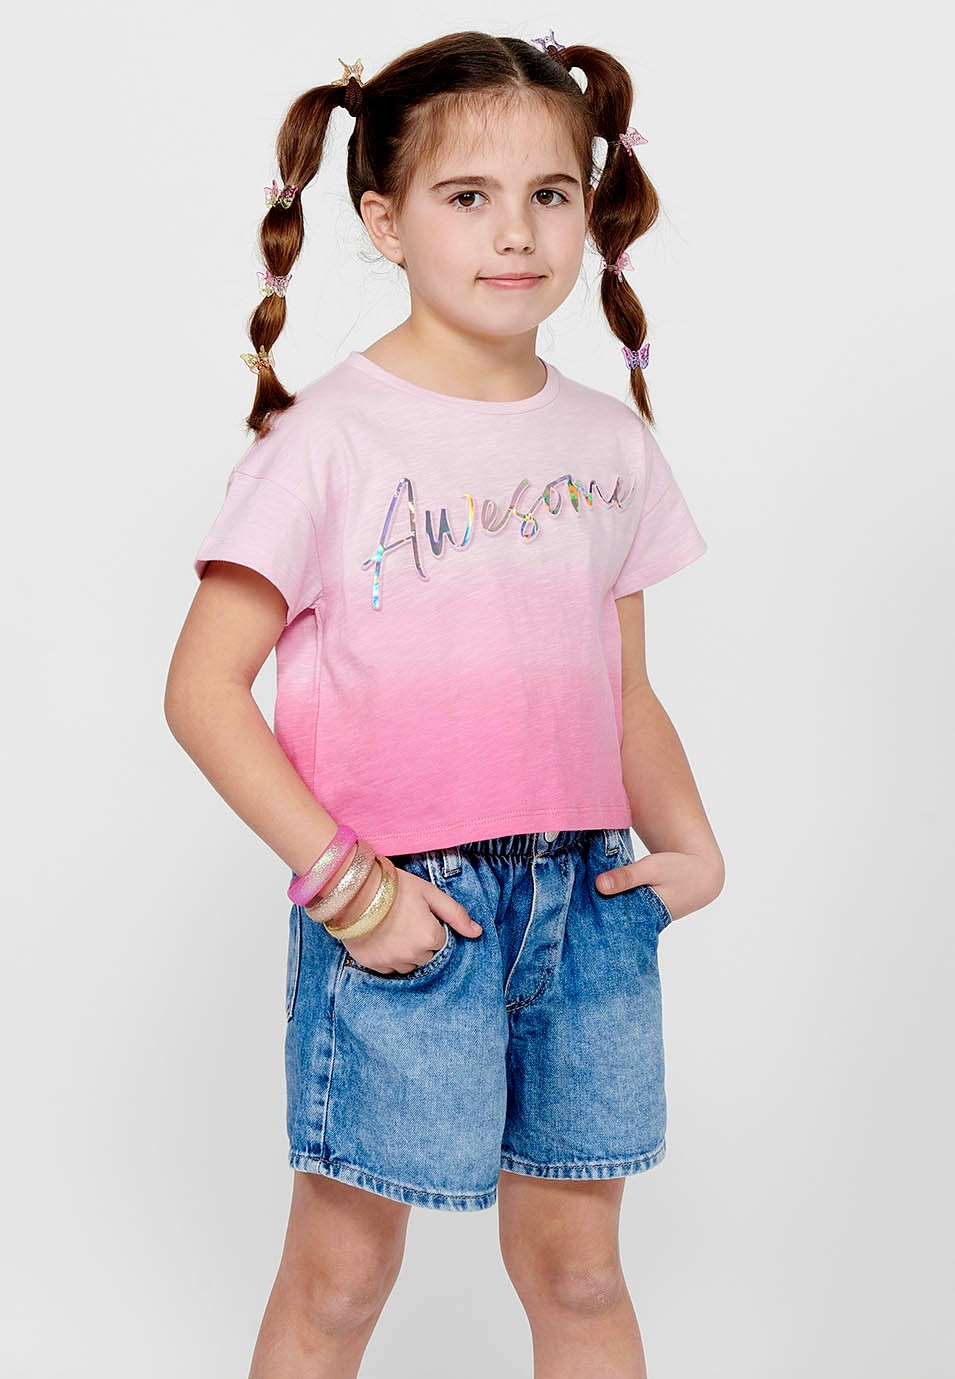 Short-sleeved T-shirt Cotton Top with Round Neck and Front Letters with Pink Volume for Girls 3